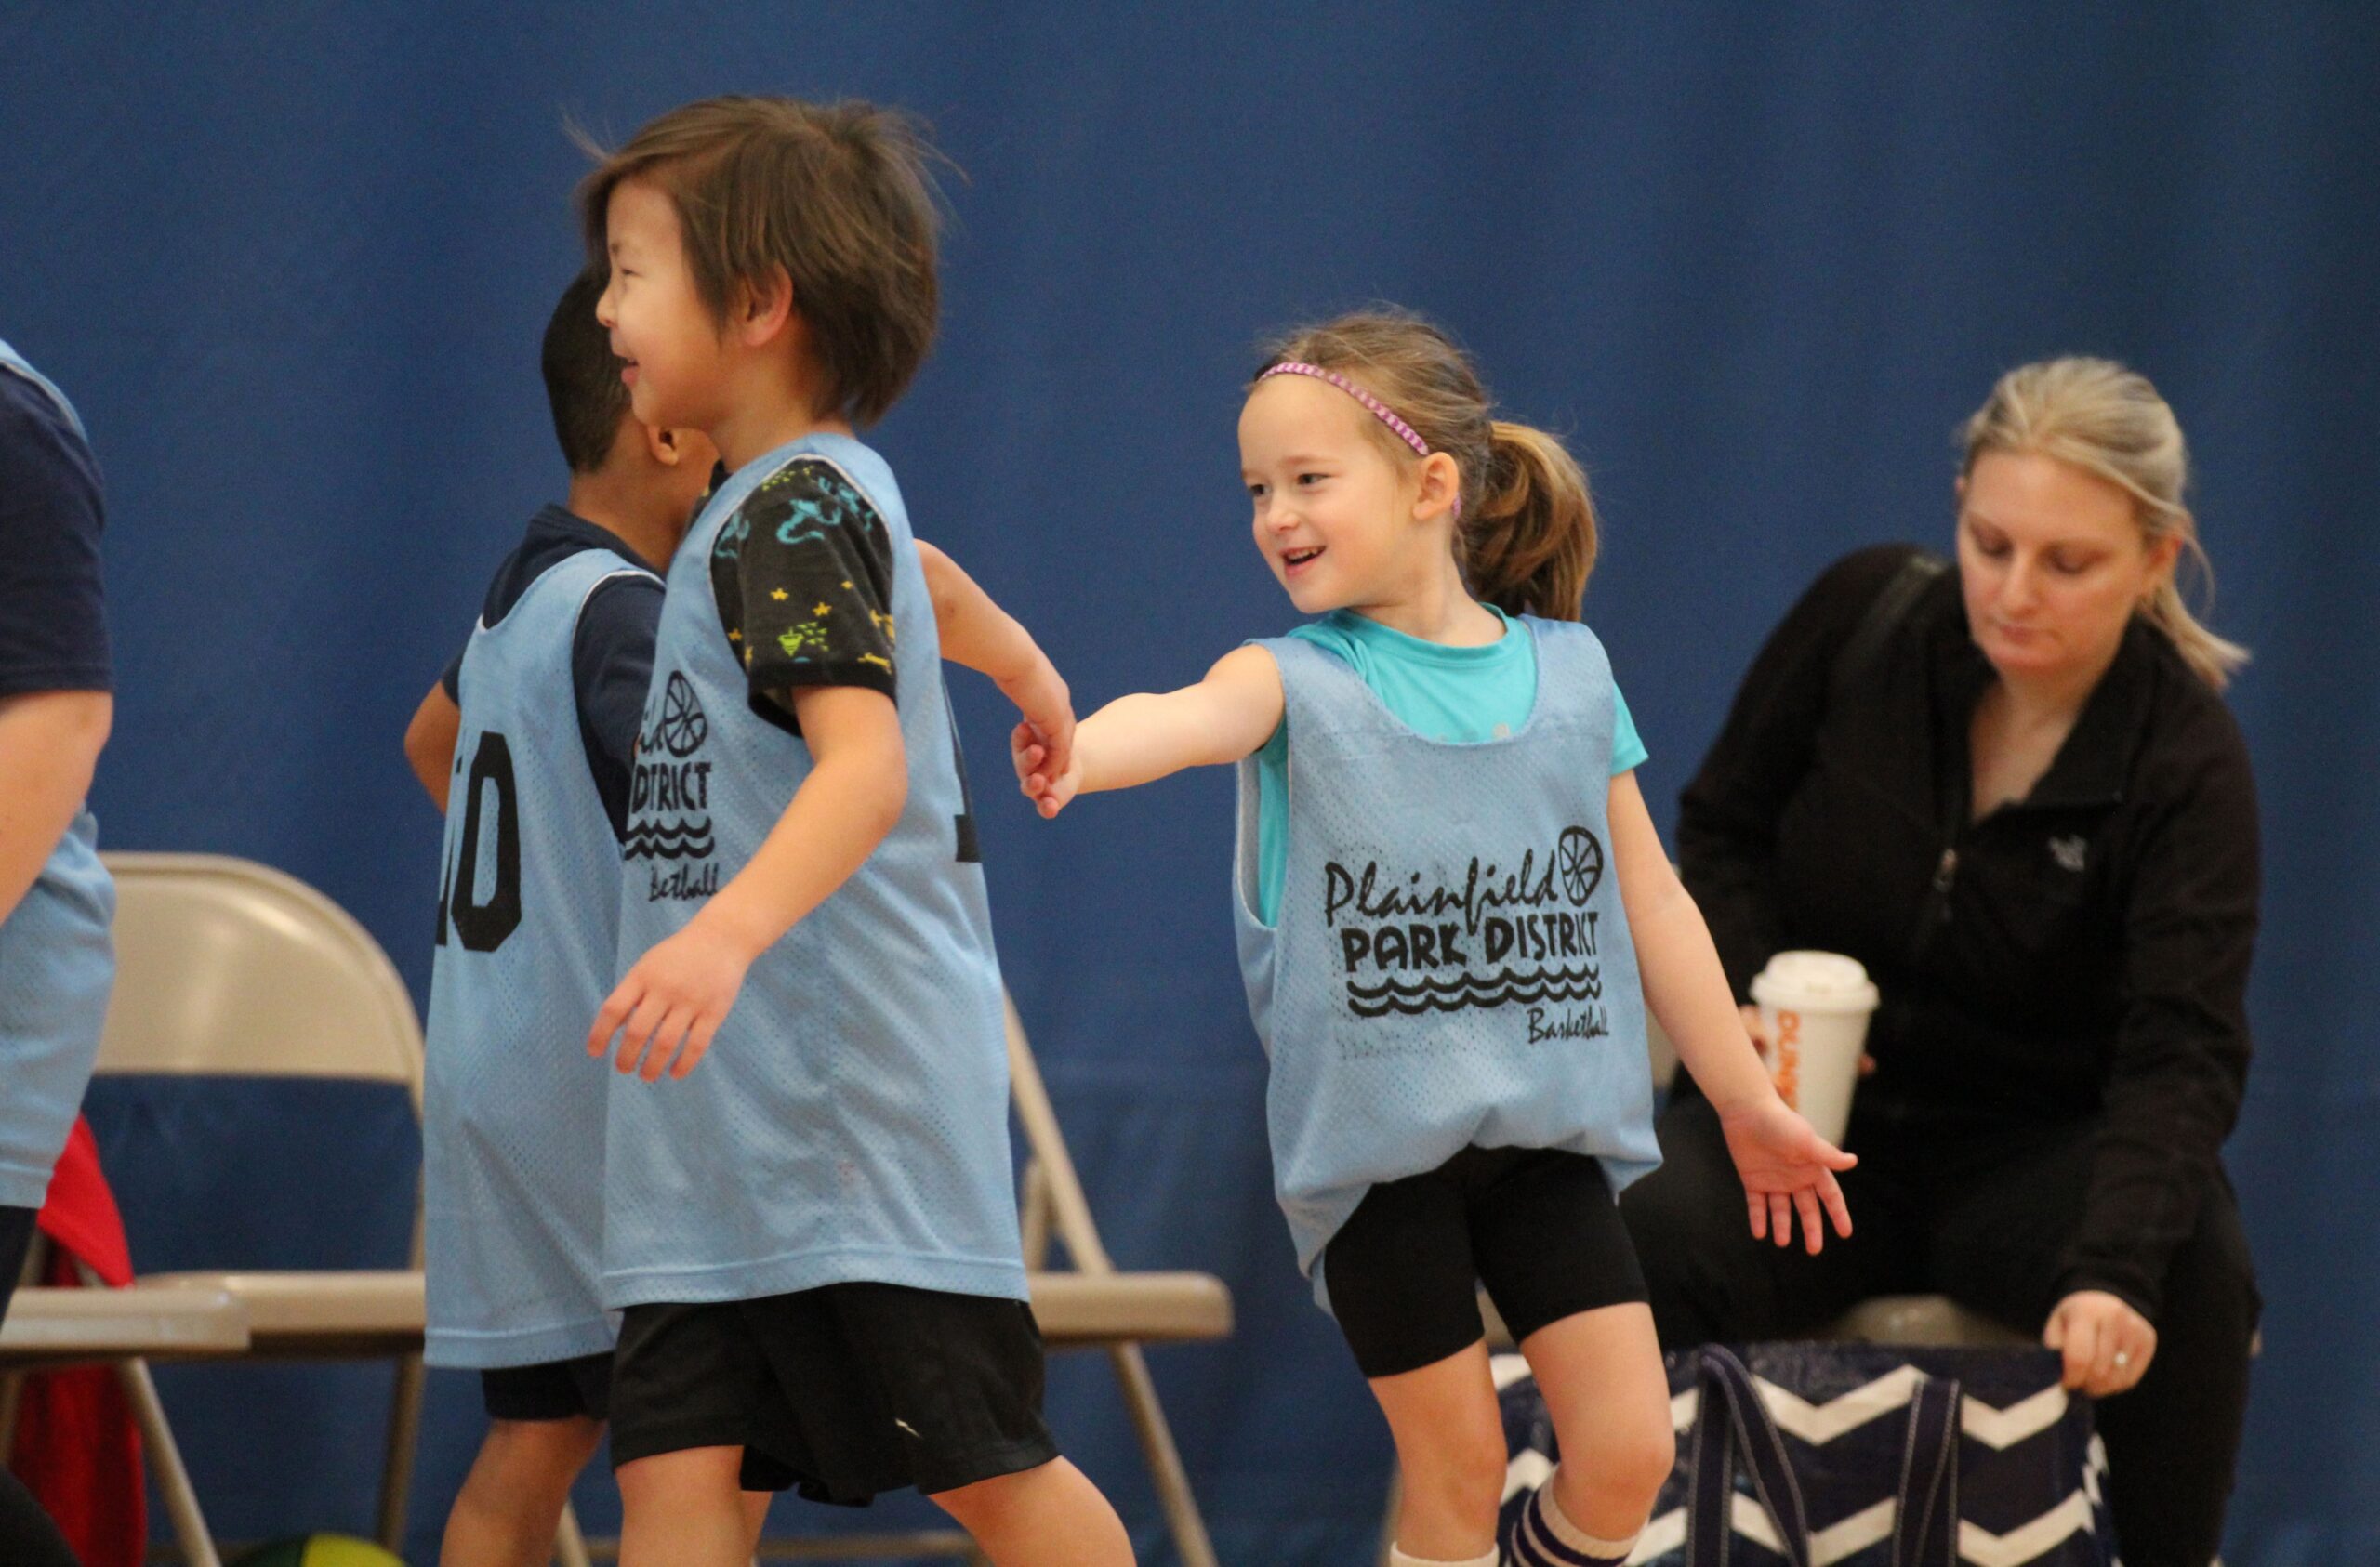 Youth basketball players giving each other a high five